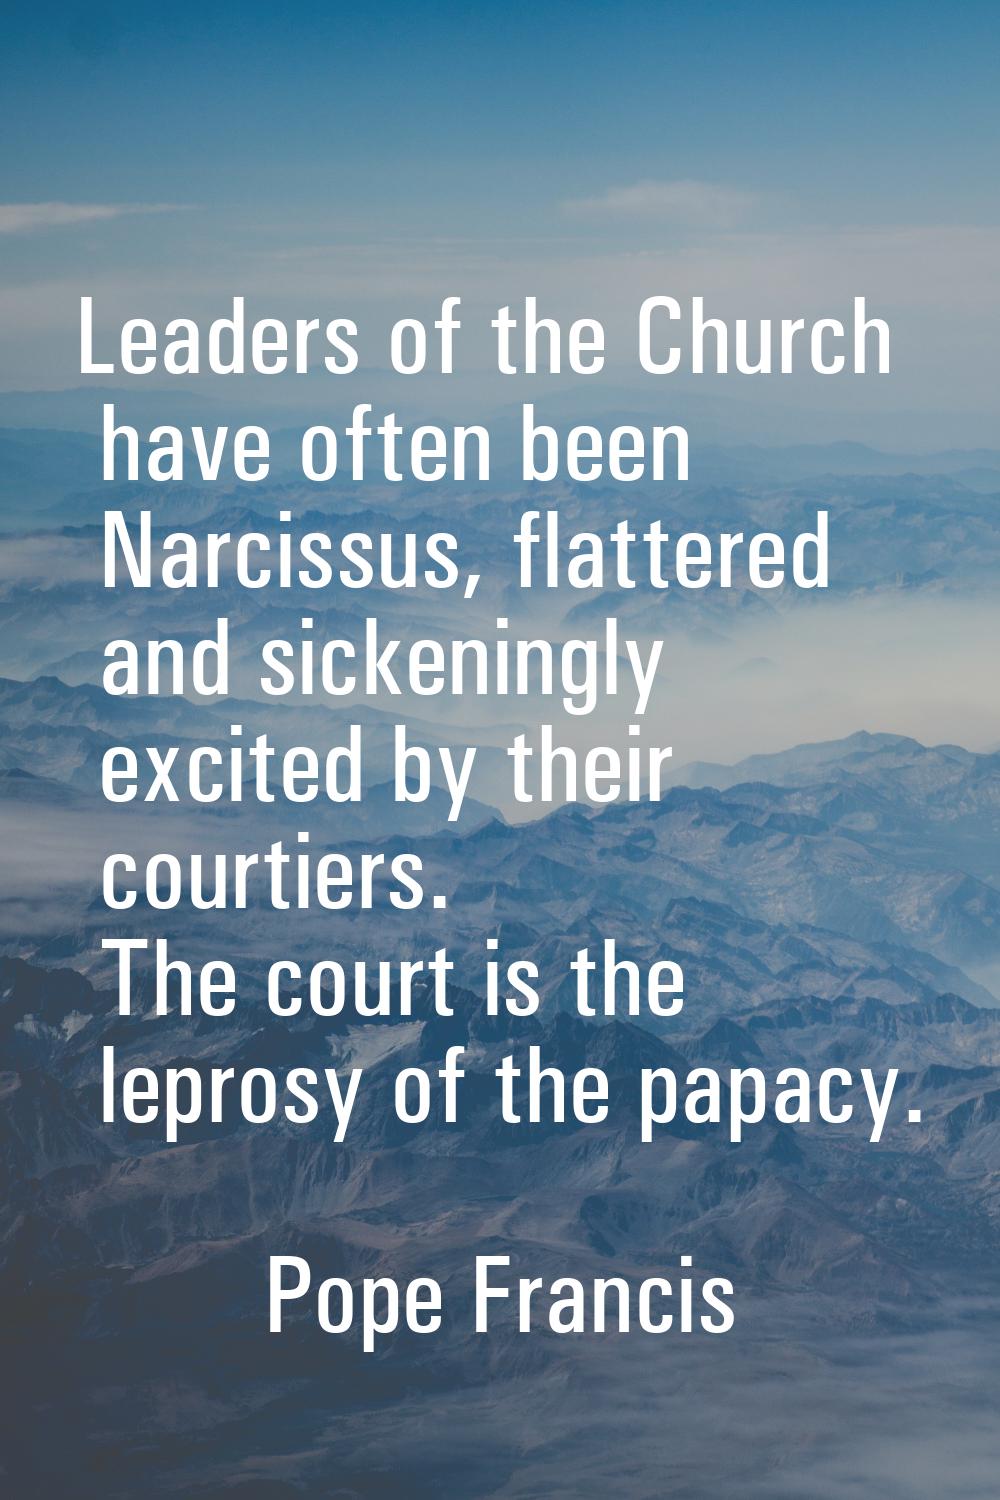 Leaders of the Church have often been Narcissus, flattered and sickeningly excited by their courtie